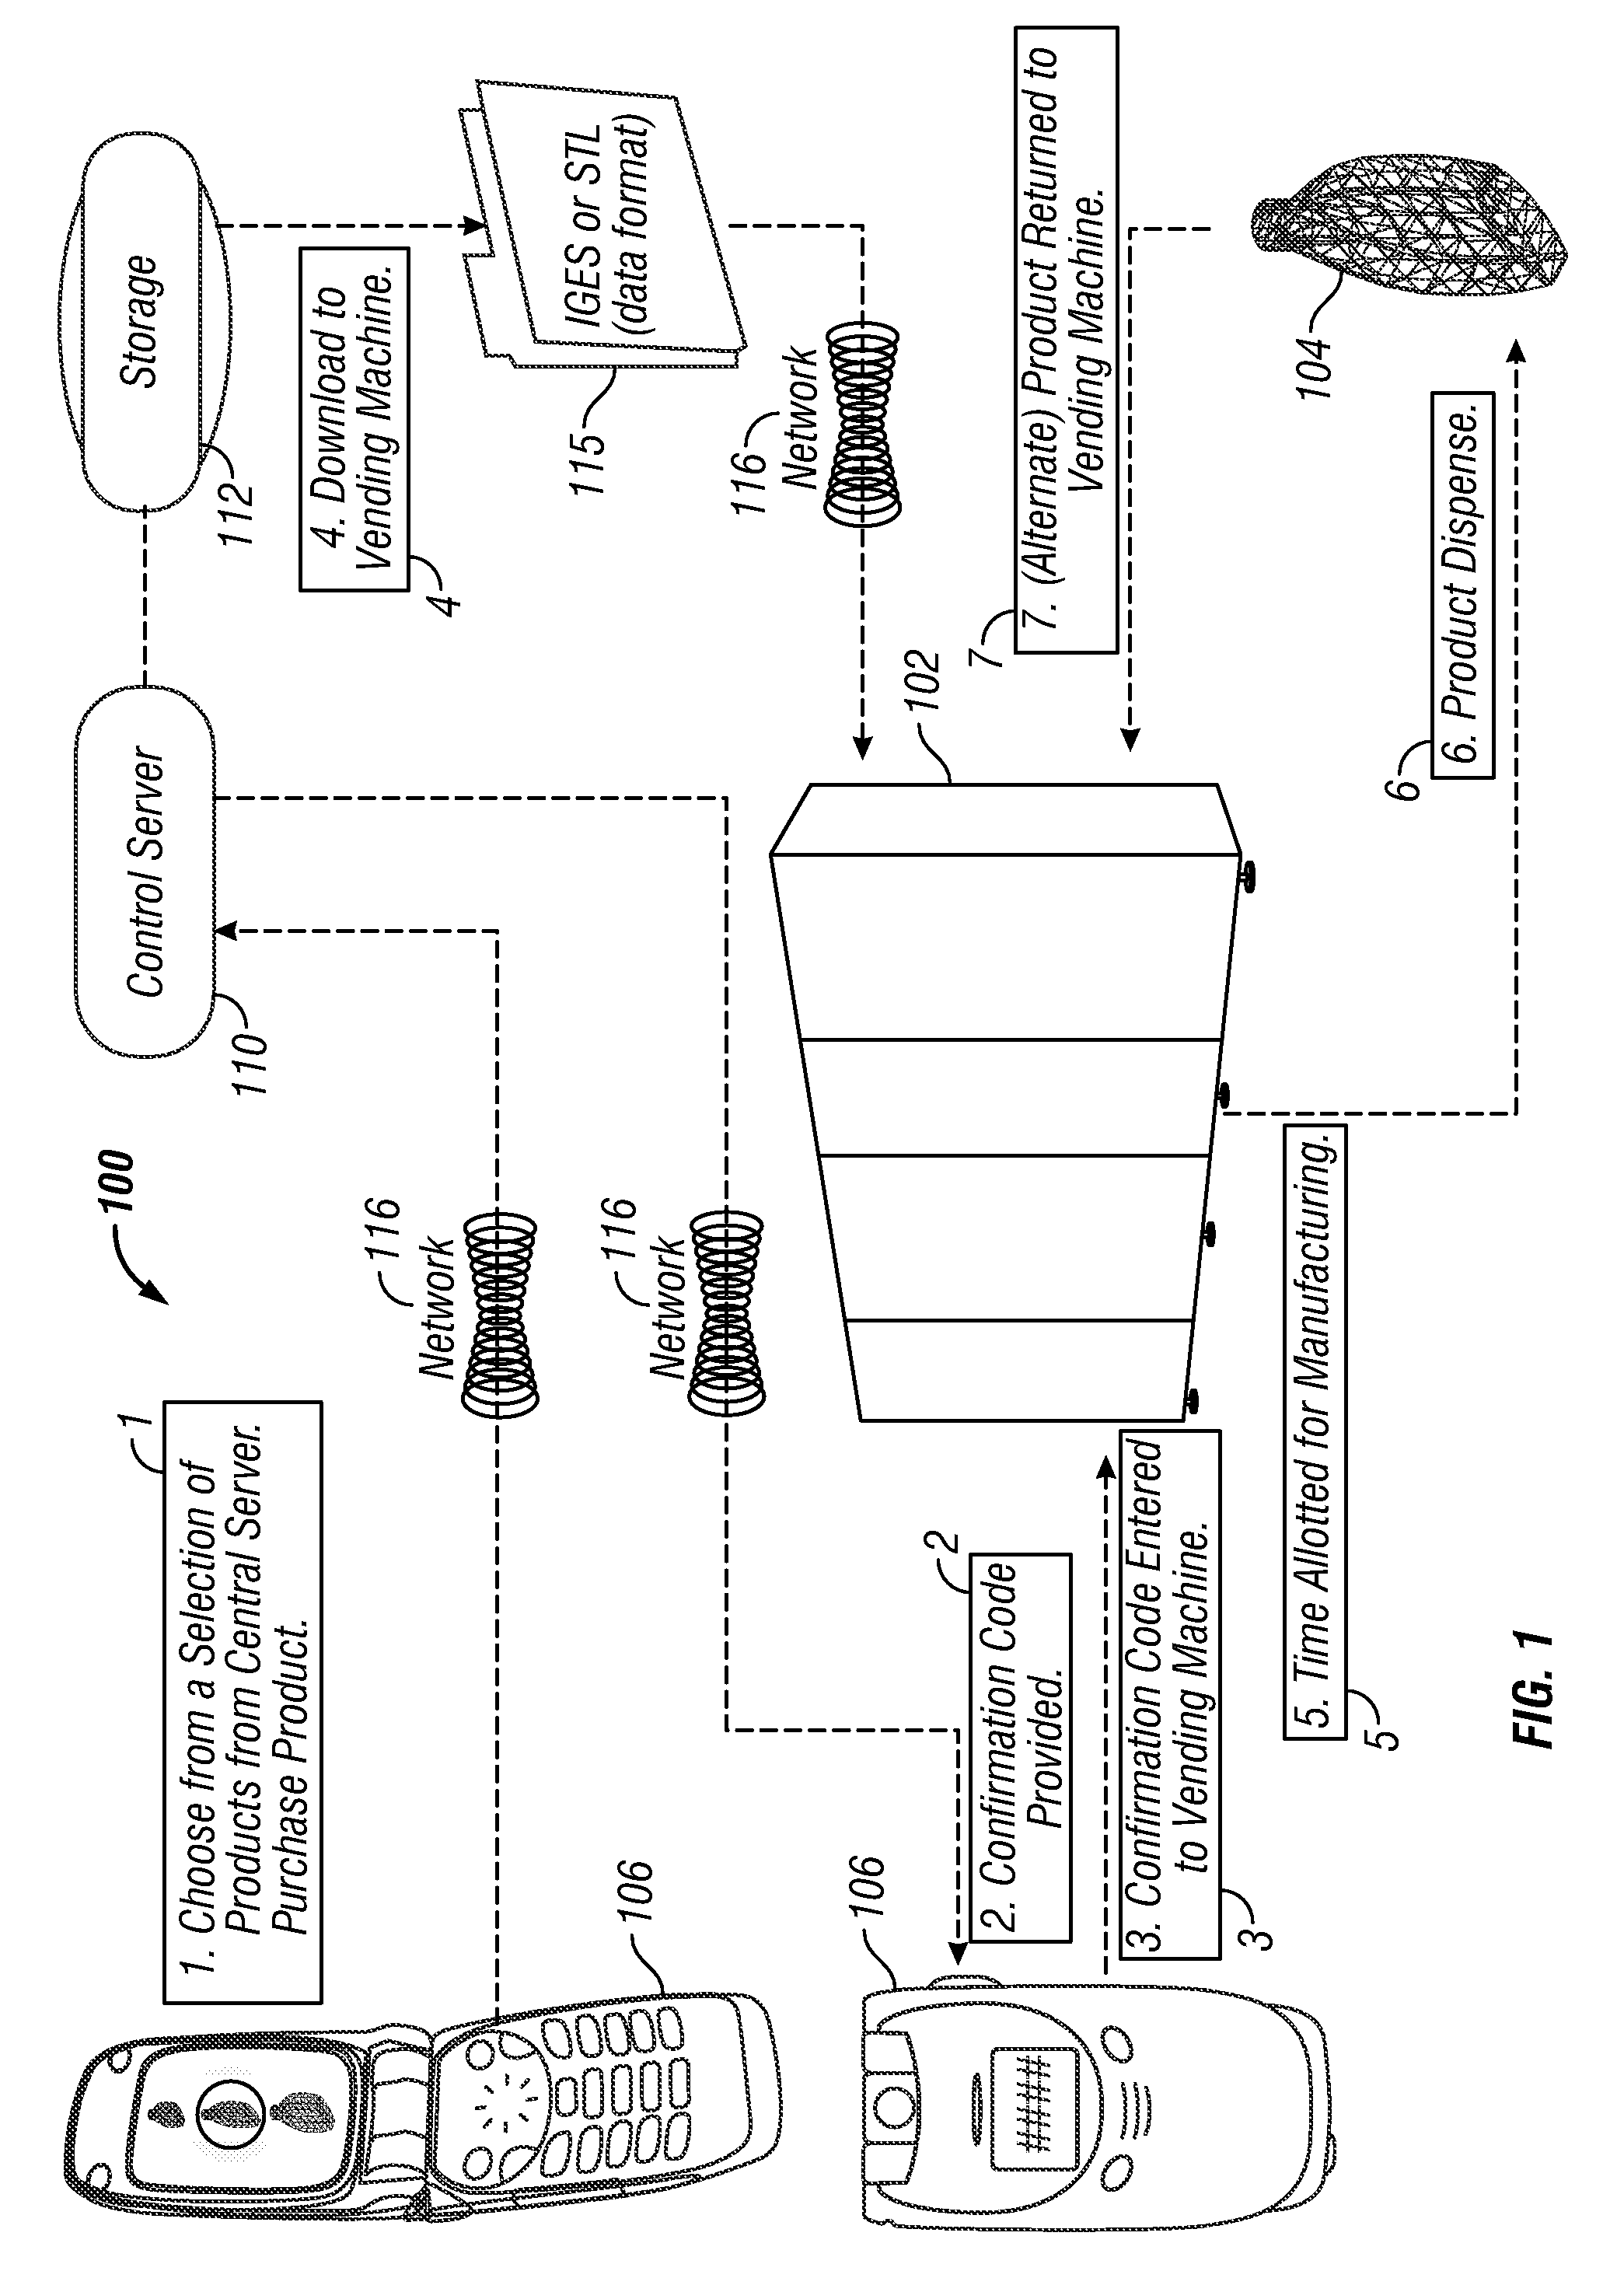 Internet-enabled apparatus, system and methods for physically and virtually rendering three-dimensional objects